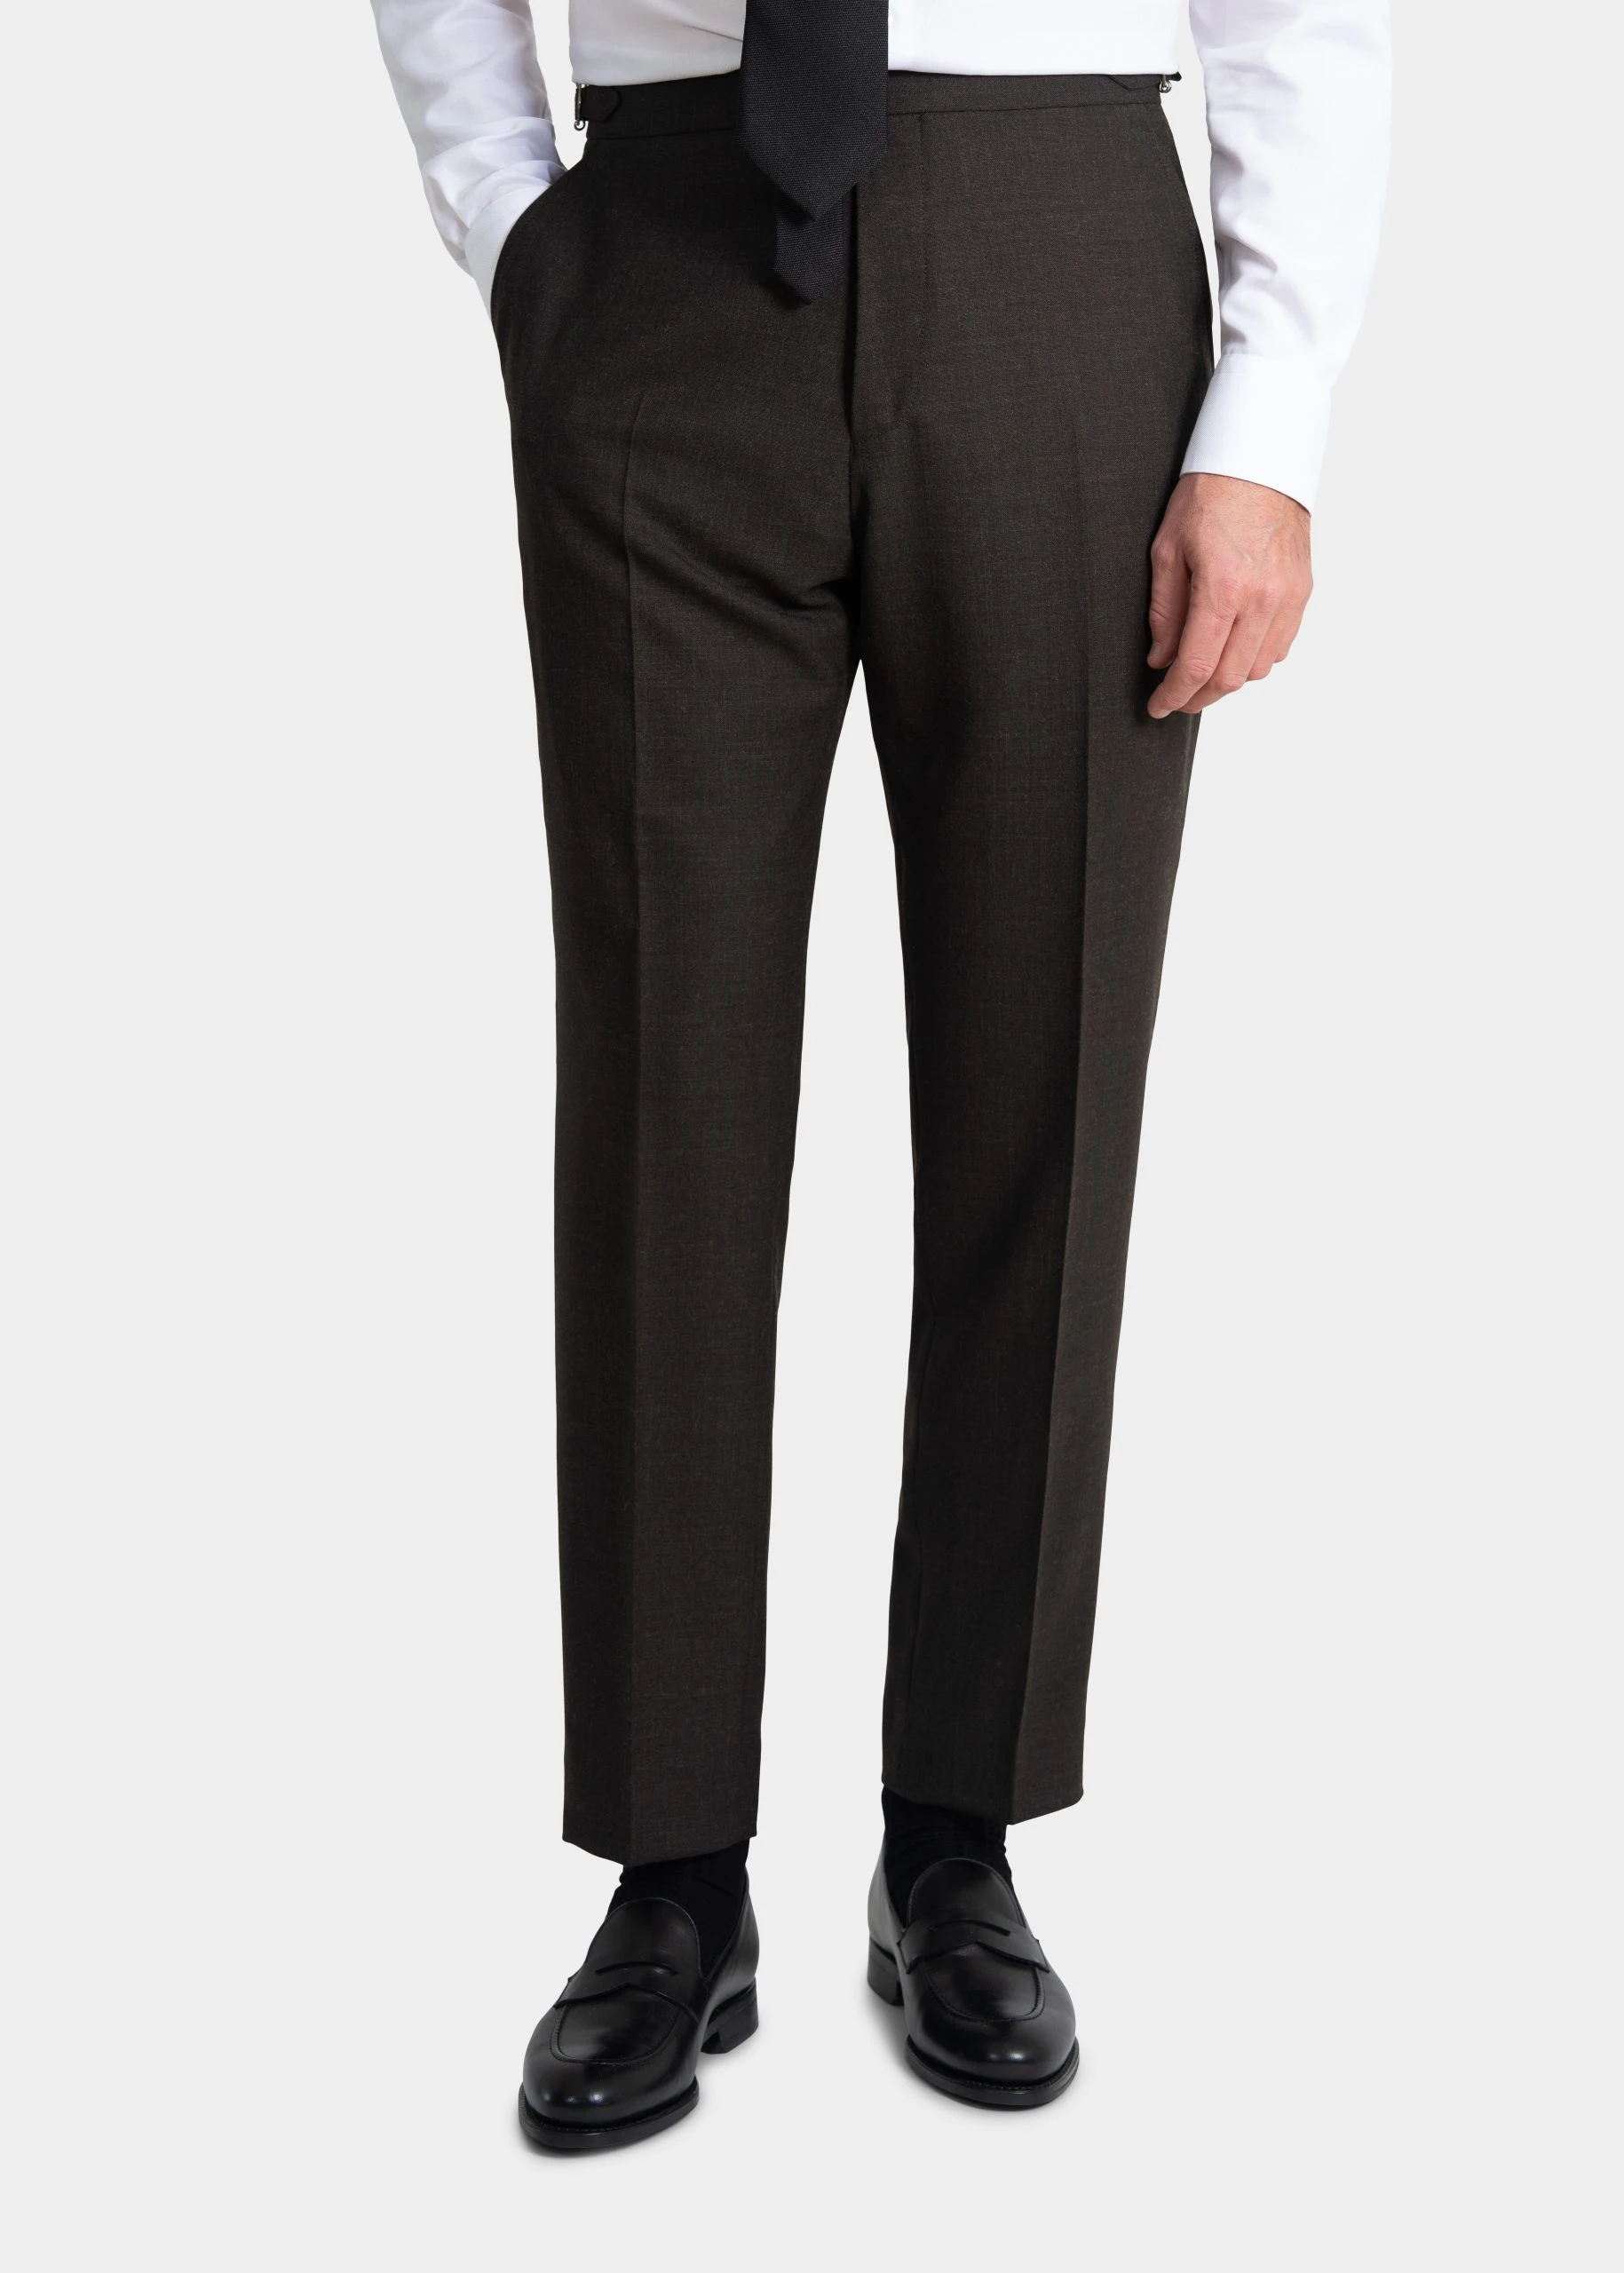 brown suit trousers in twistair fabric